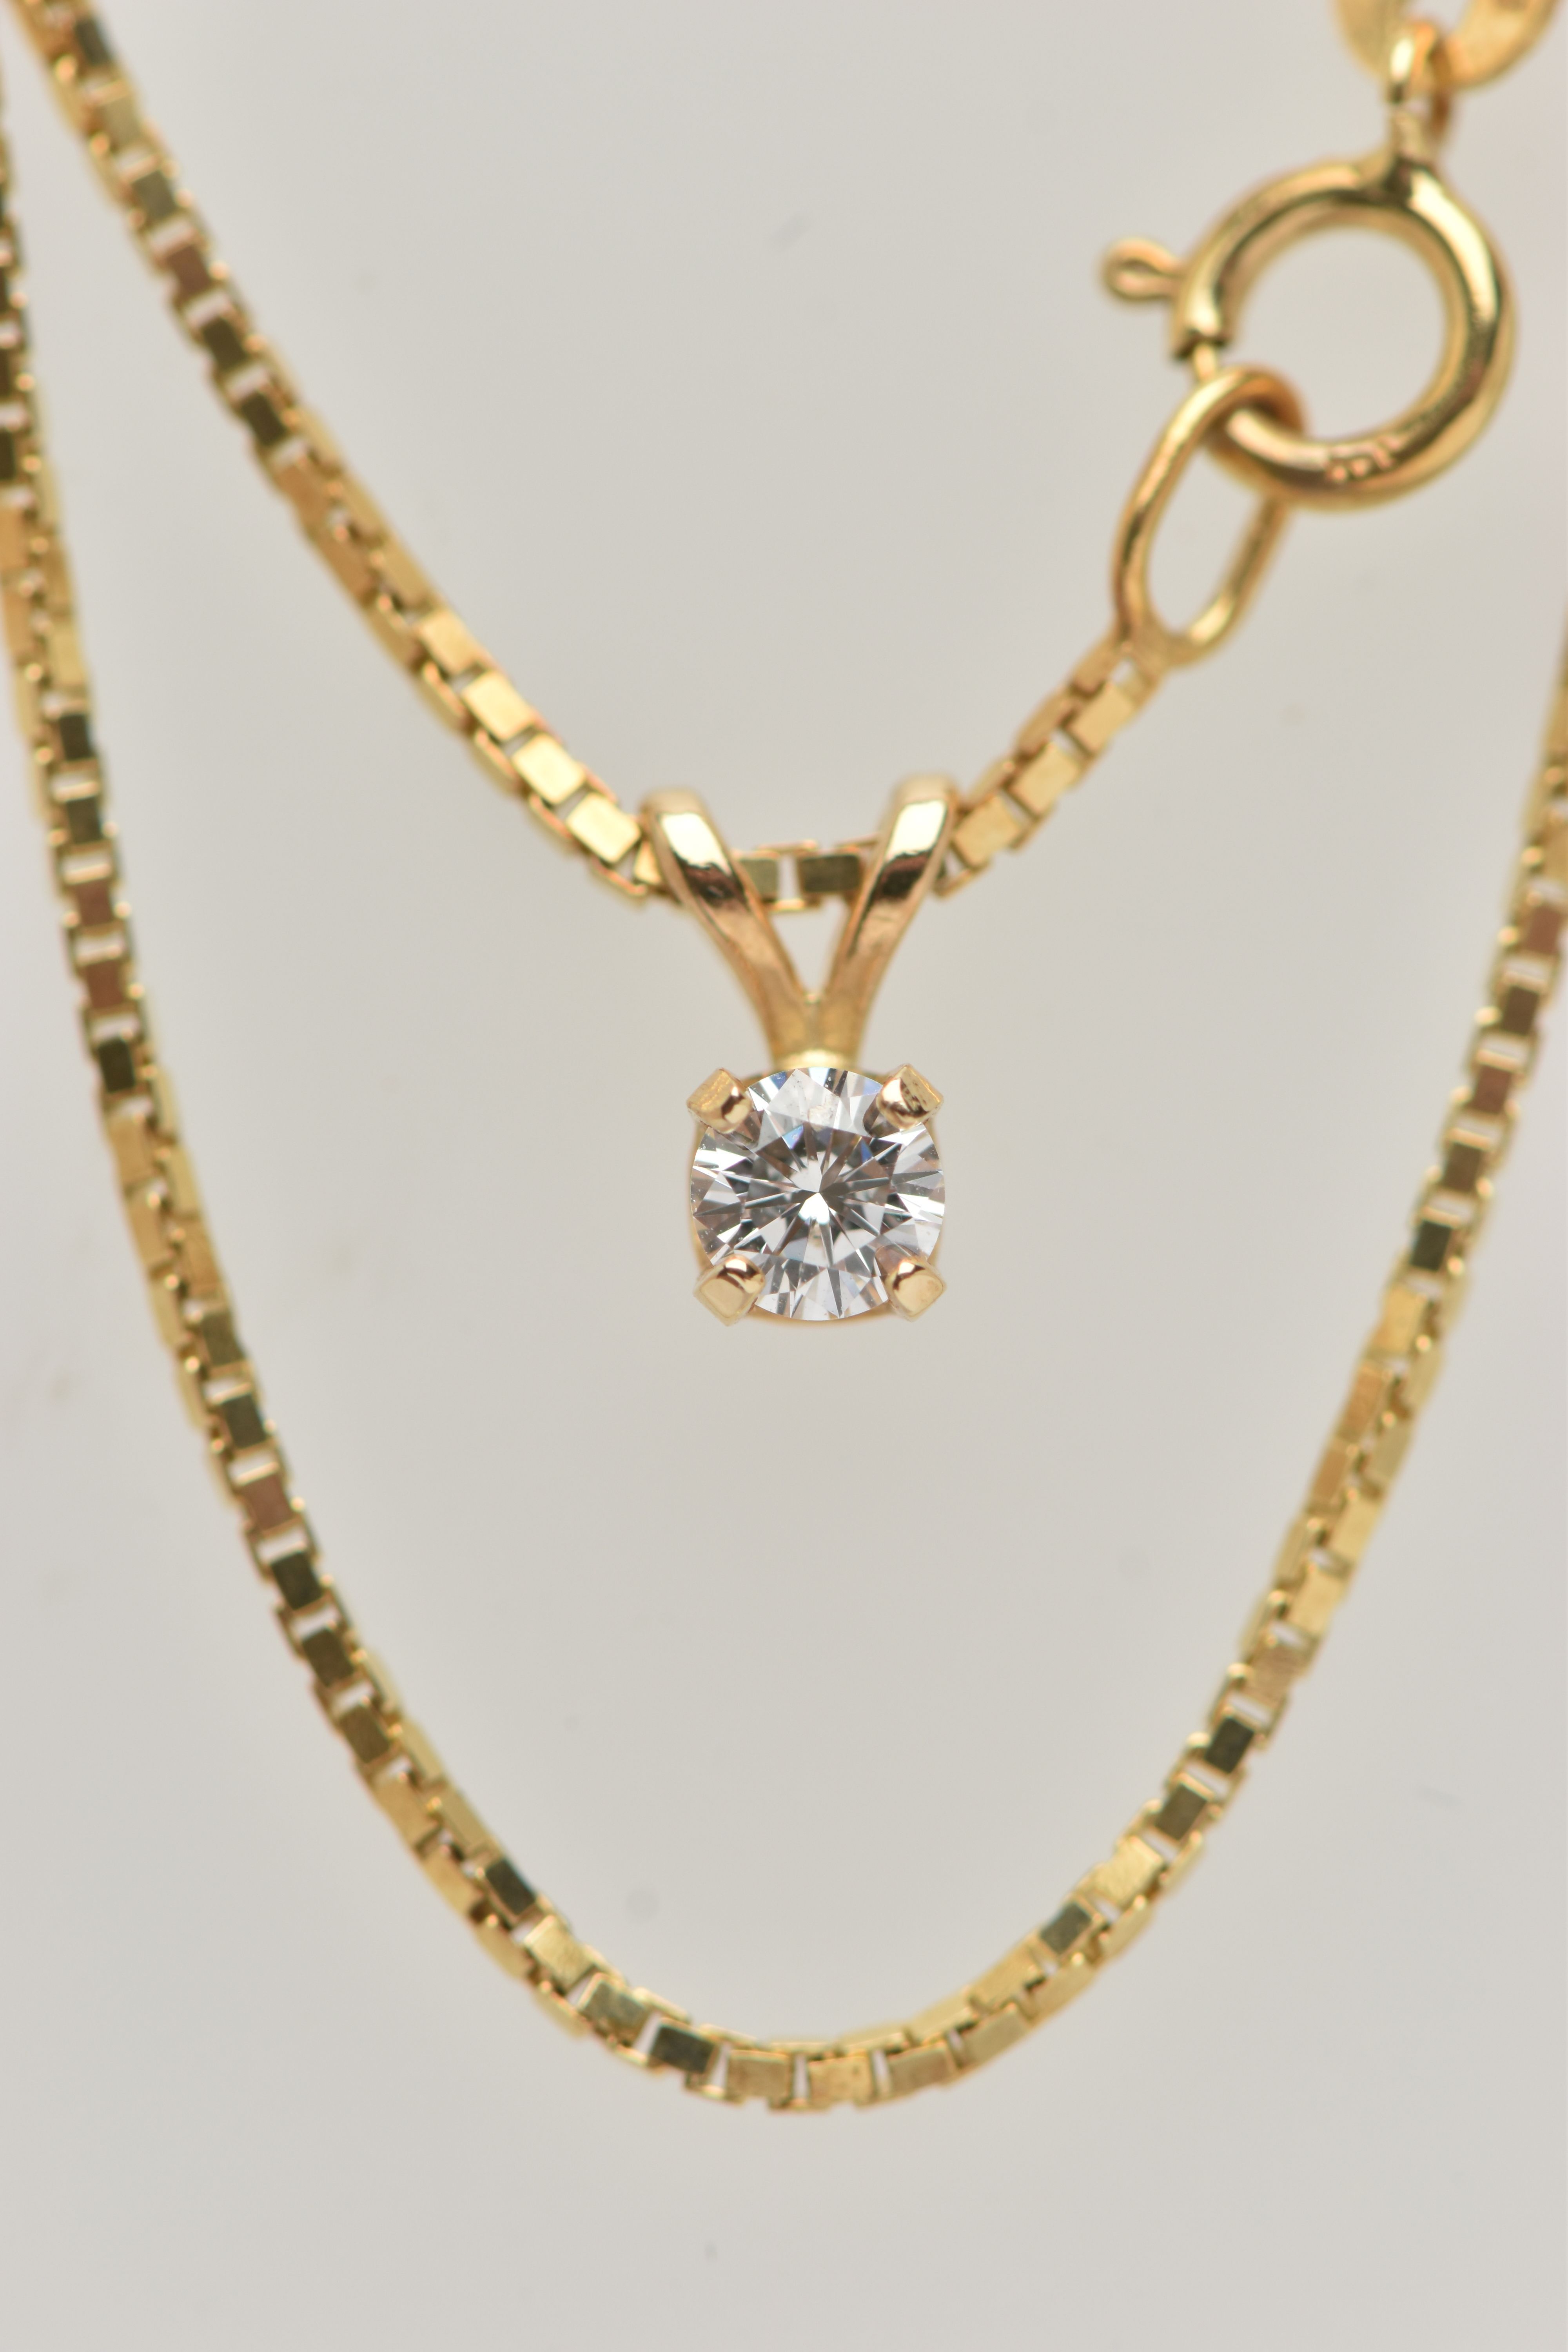 A DIAMOND SINGLE STONE PENDANT WITH YELLOW METAL CHAIN, the pendant set with a round brilliant cut - Image 2 of 4